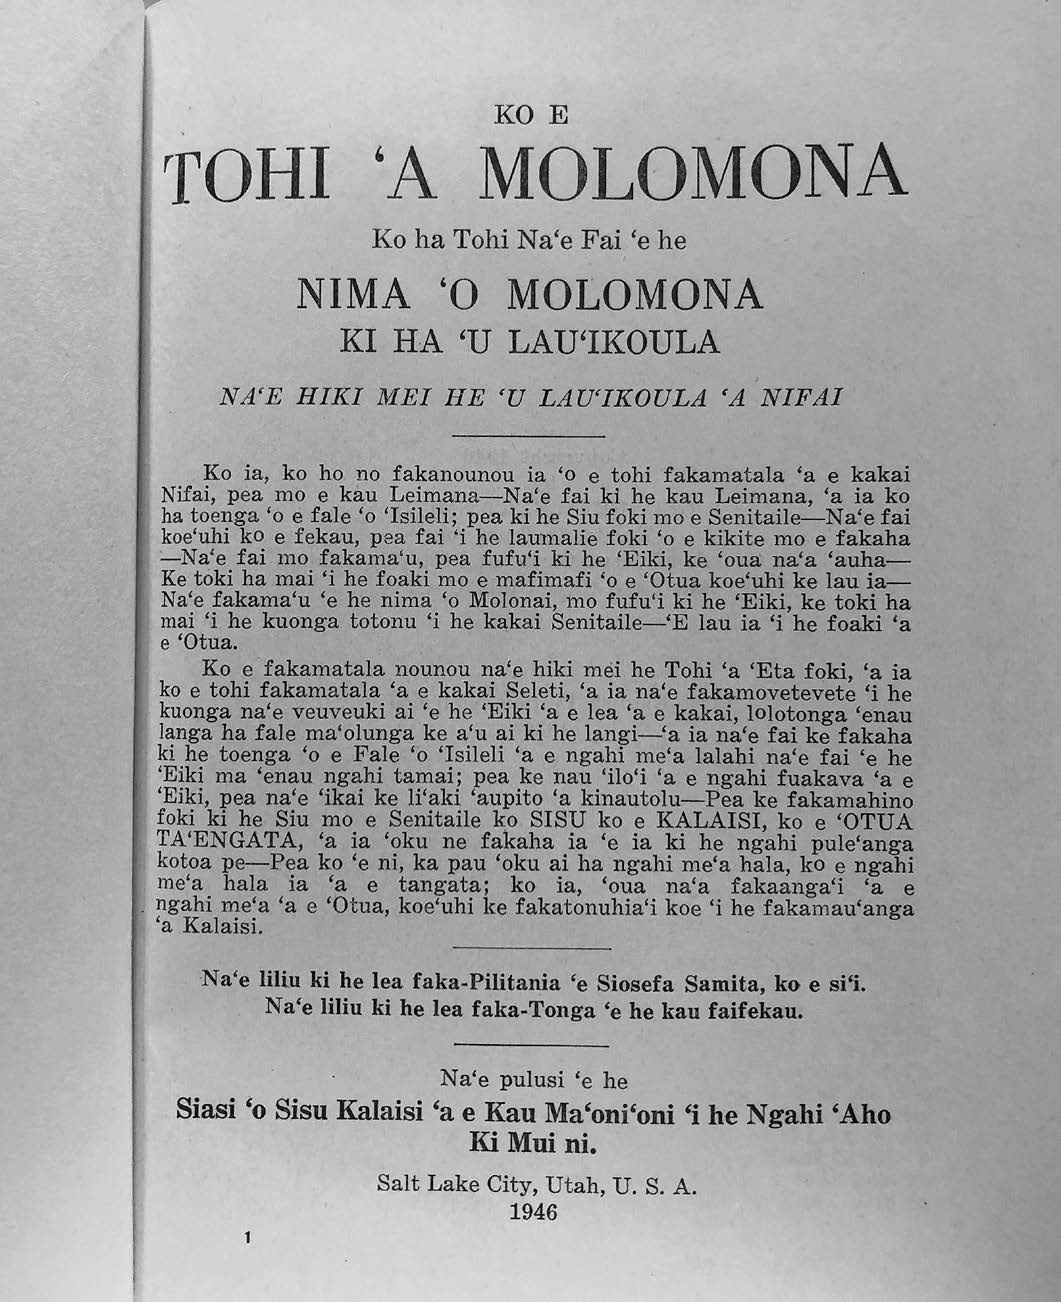 Title page of the first edition of the Tongan Book of Mormon. Courtesy of Reed Moon